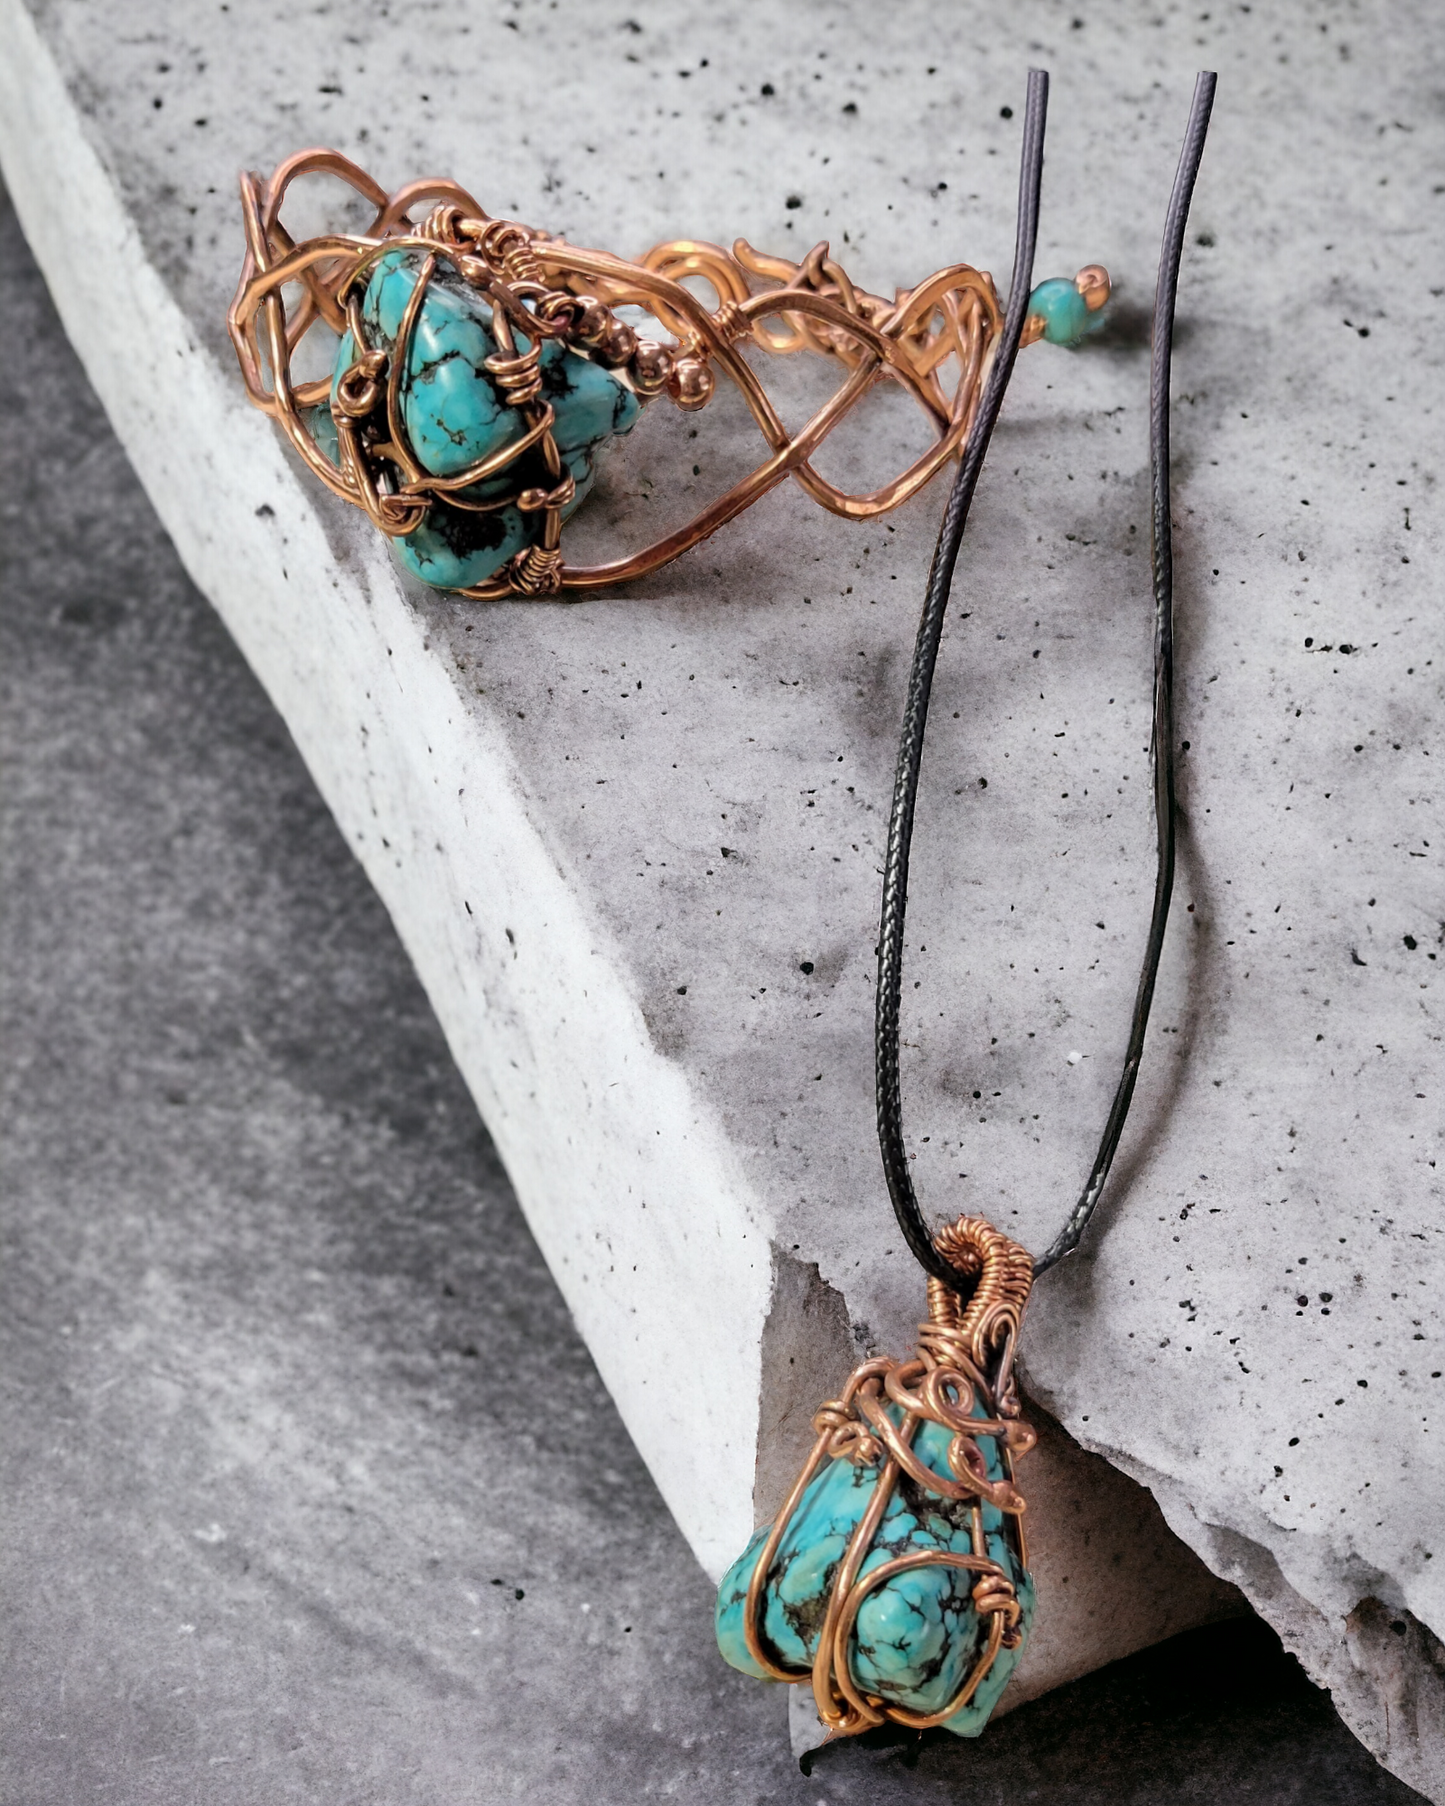 Turquoise Bracelet and necklace wire wrapped